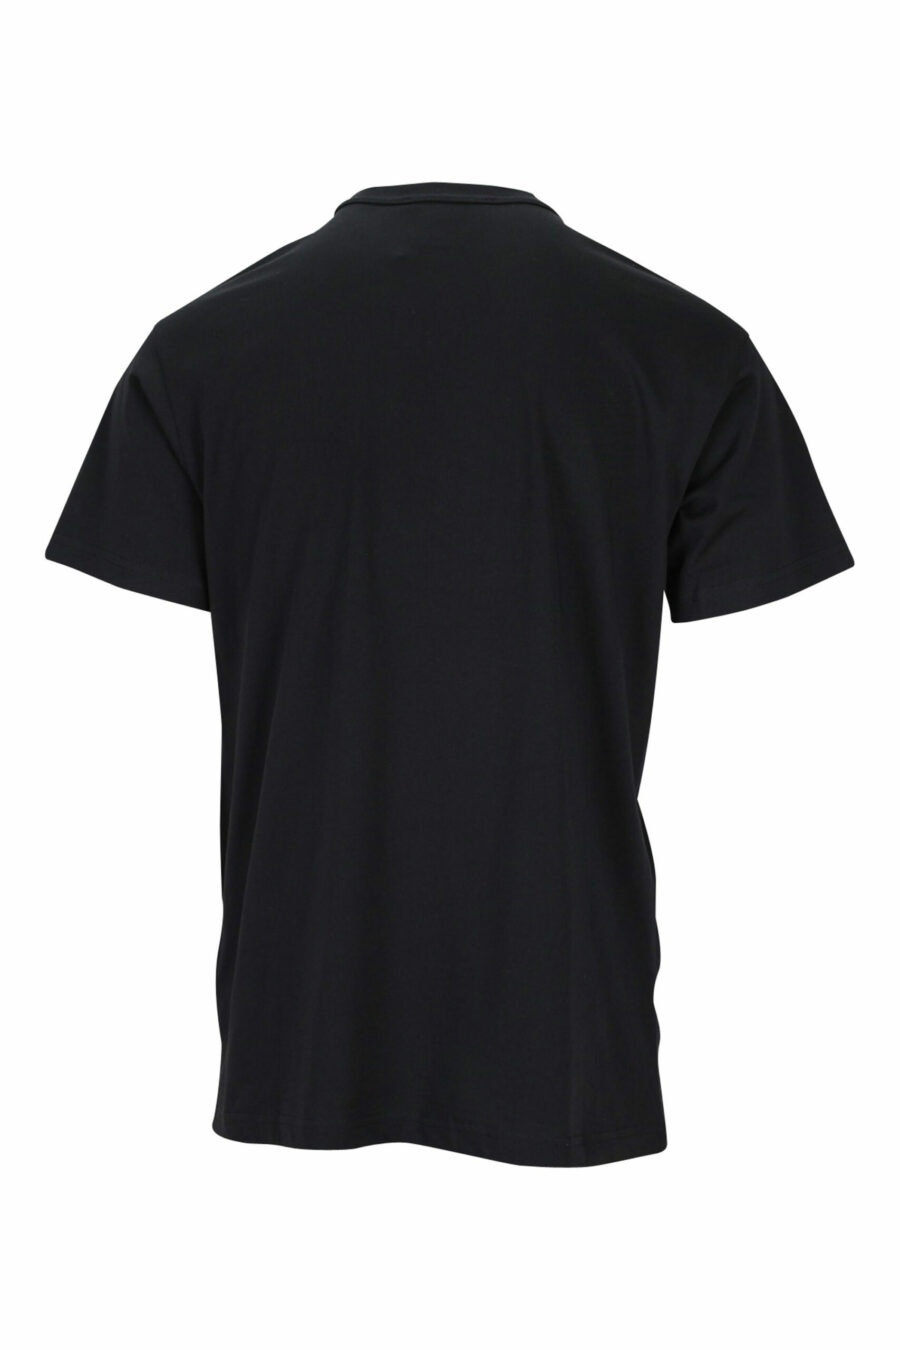 Black T-shirt with contrasting classic maxilogue - 8052019457698 1 scaled